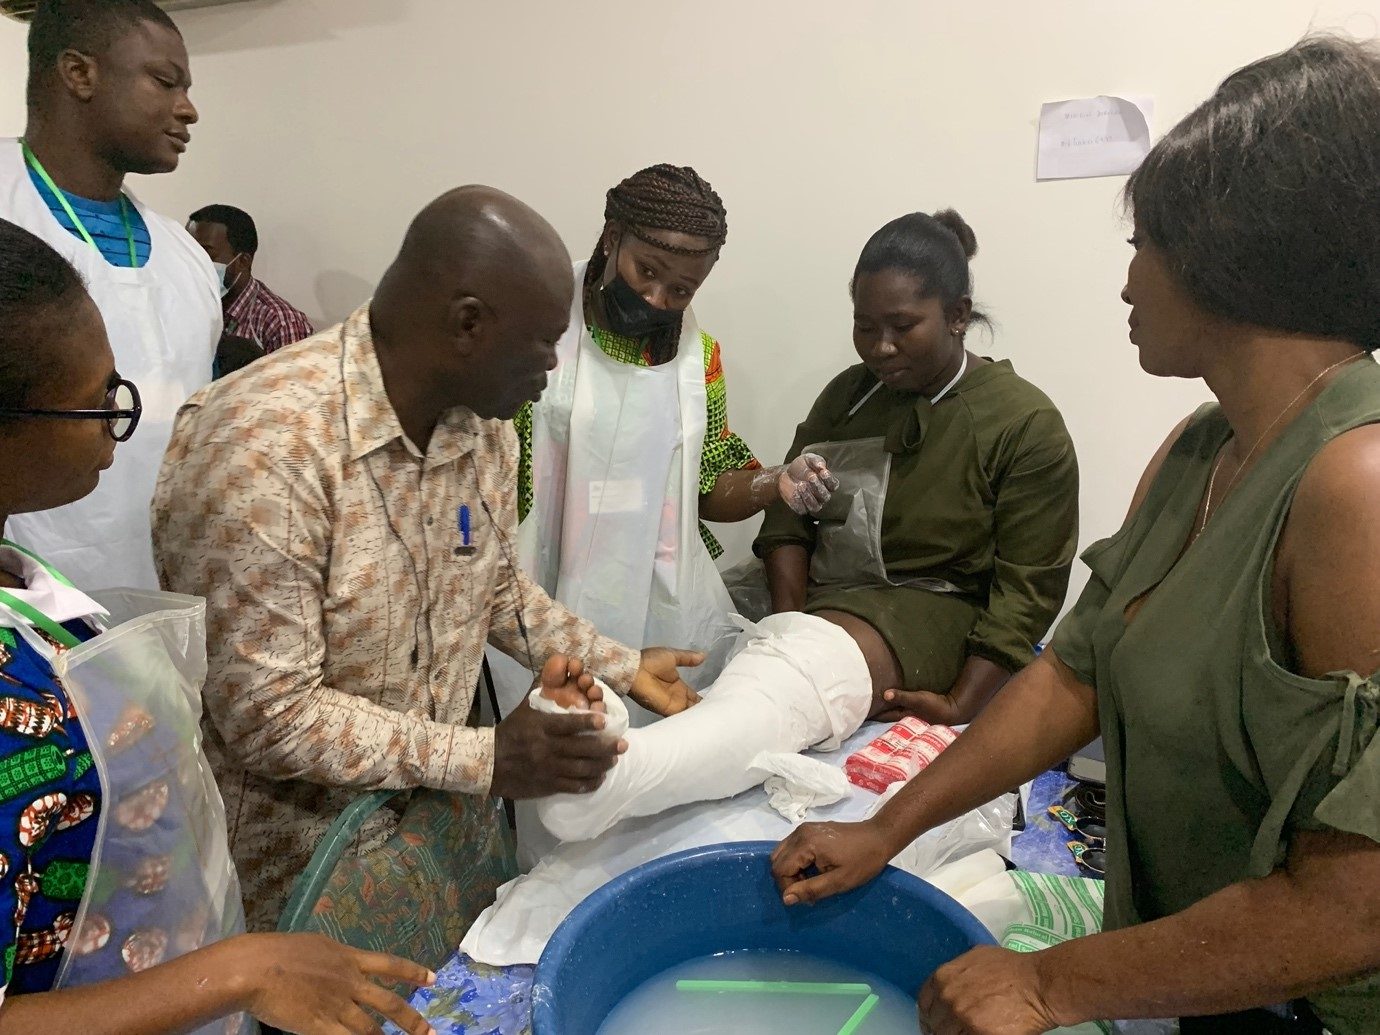 Surgeons gather in Kumasi, Ghana for Nonoperative Fracture Management course